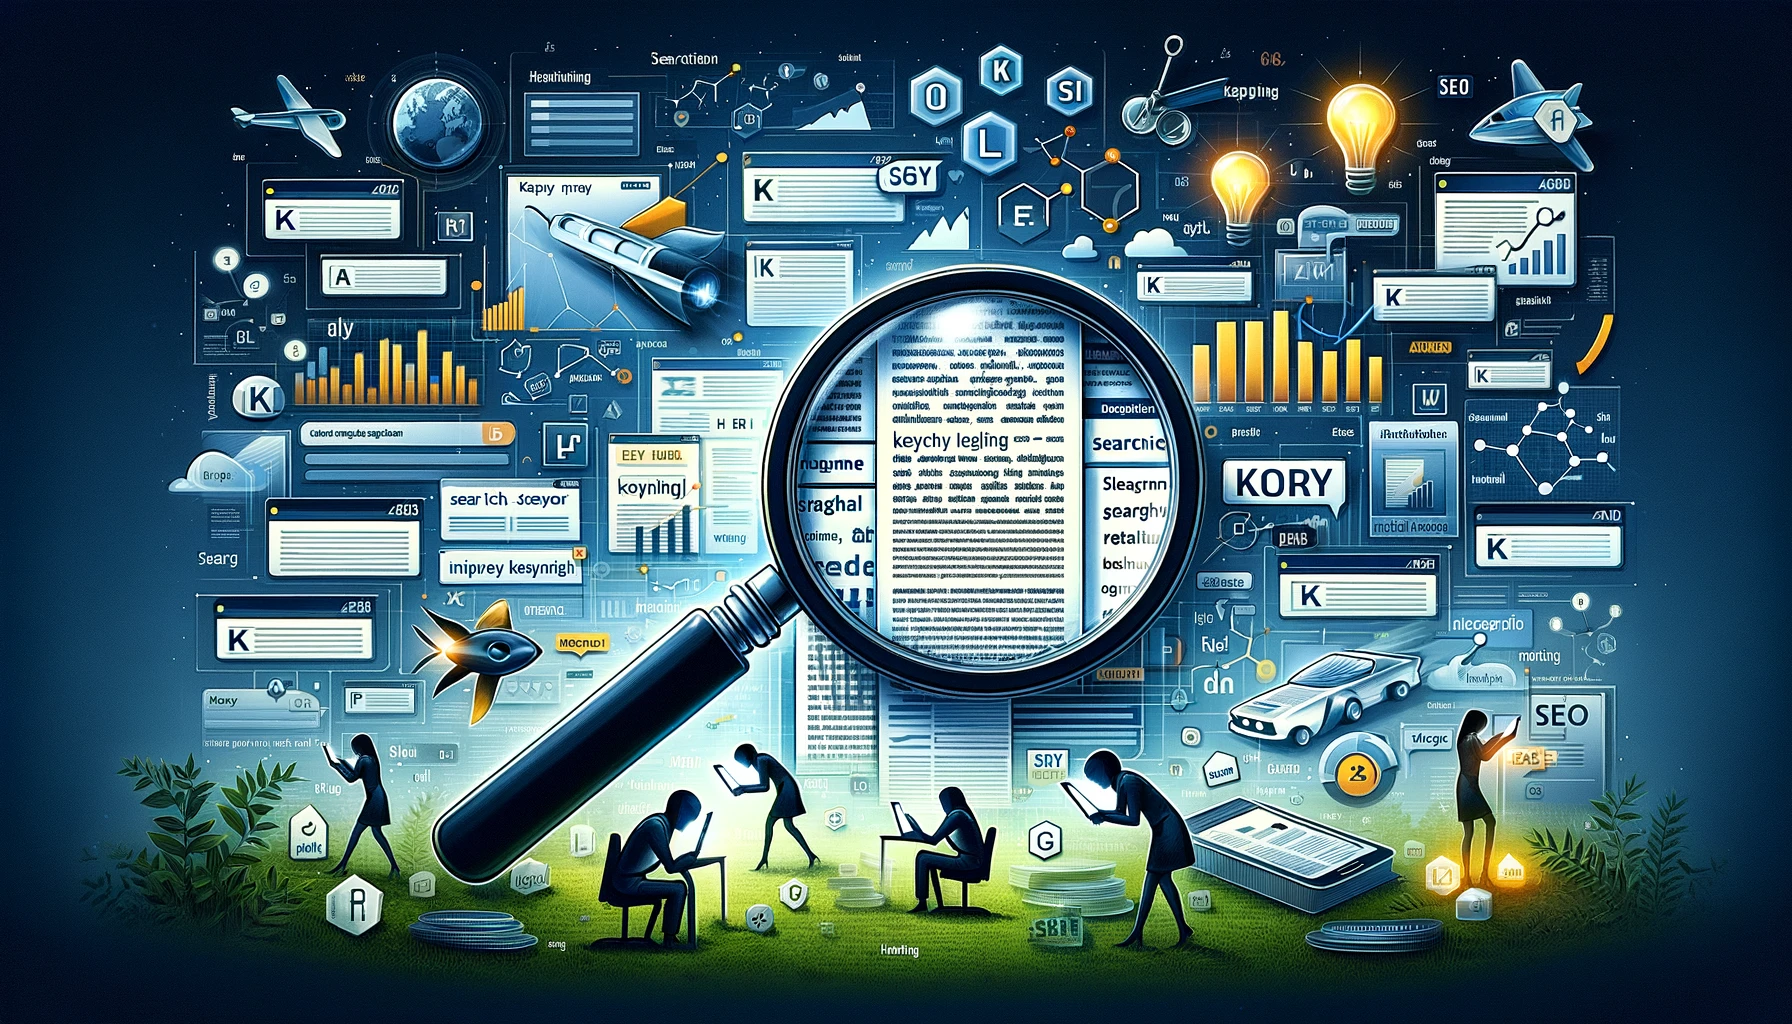 Illustration showcasing Keyword Selection Strategies, with a magnifying glass highlighting a list of keywords, surrounded by users conducting searches on various devices, and charts depicting keyword performance.